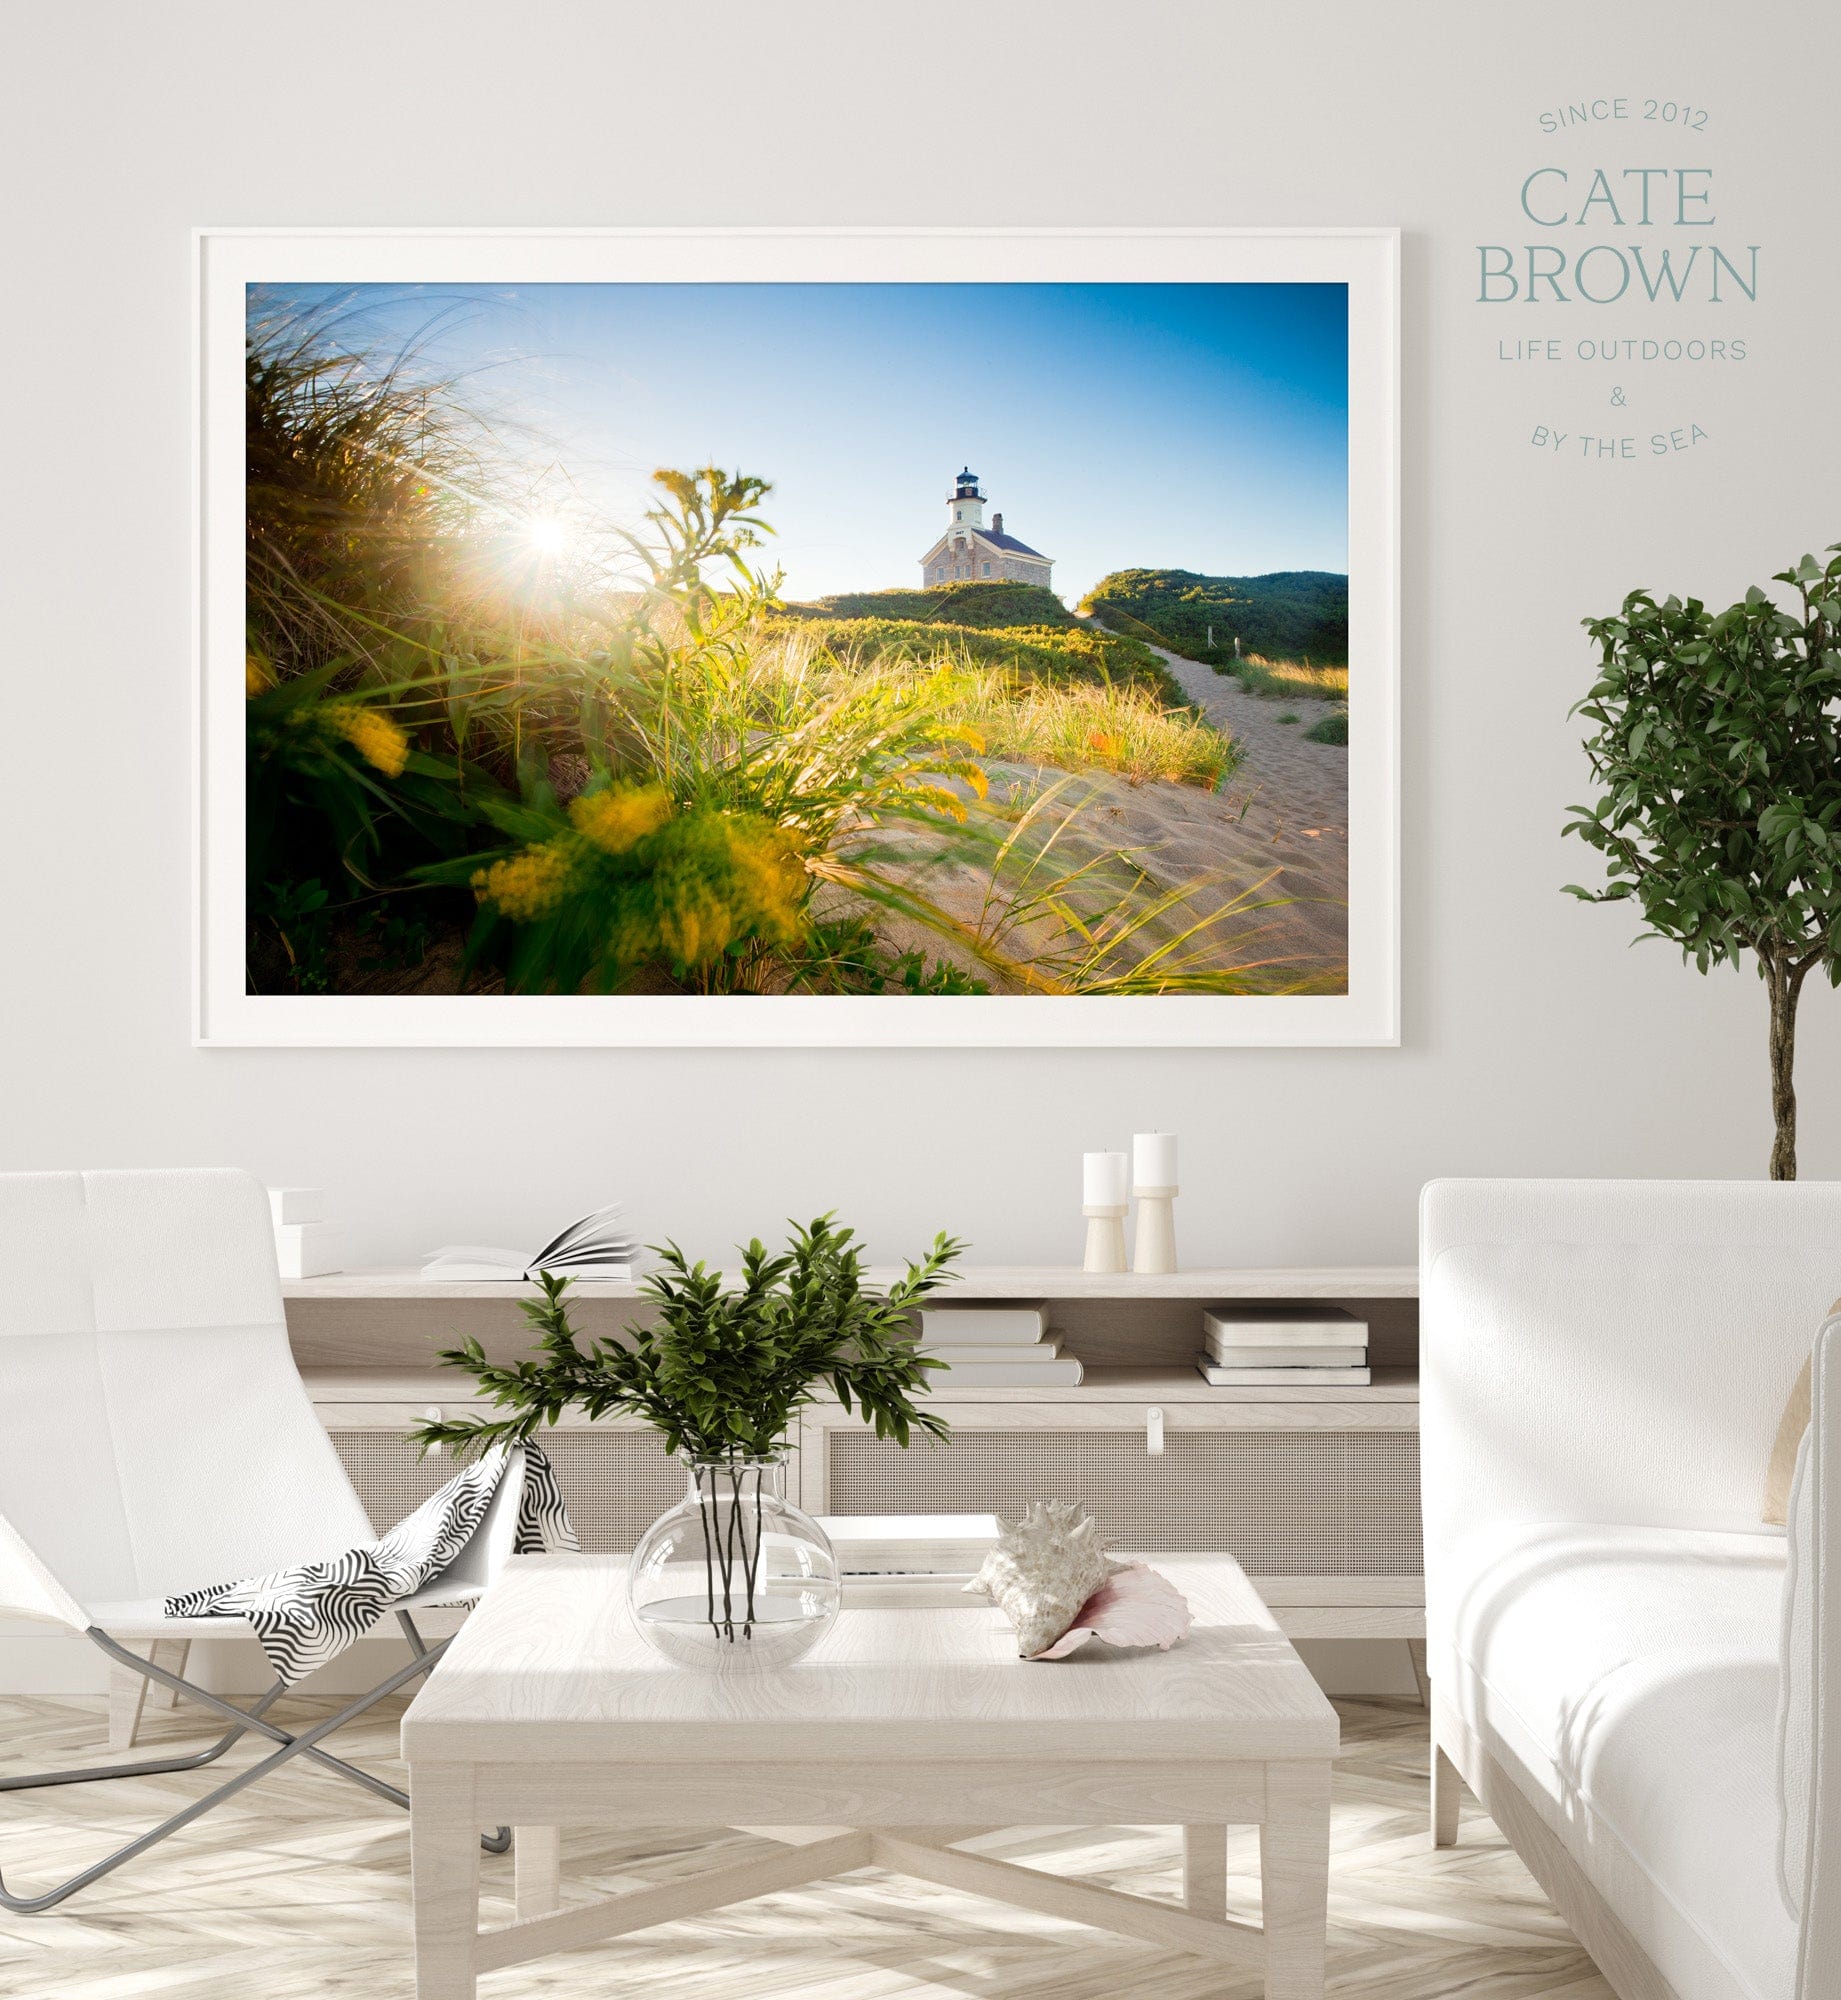 Cate Brown Photo Fine Art Print / 8"x12" / None (Print Only) North Light in Morning #2  //  Landscape Photography Made to Order Ocean Fine Art